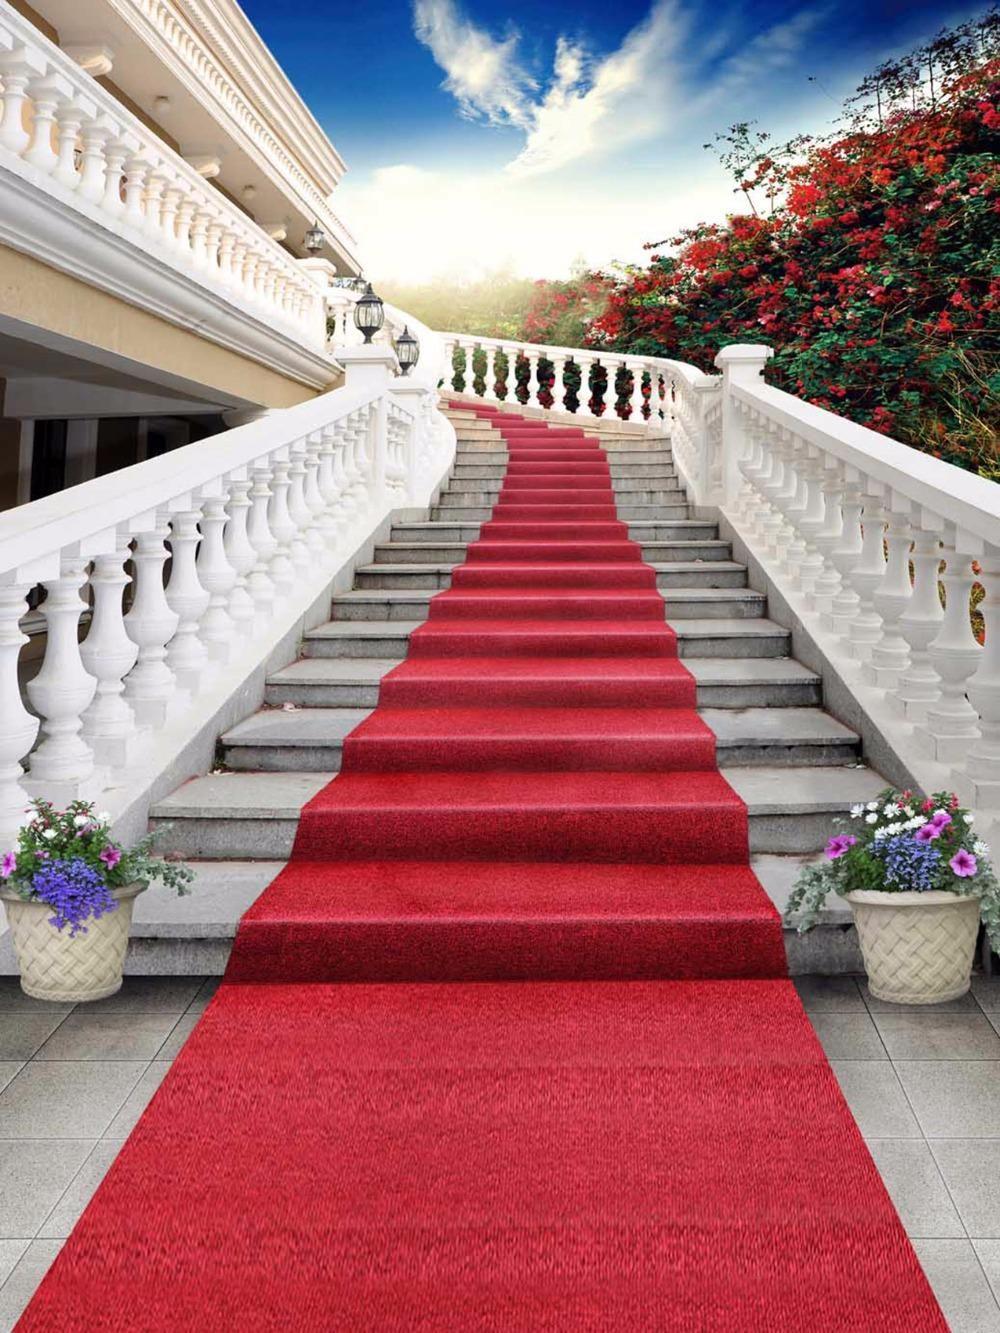 Outdoor Staircase Wedding Backdrops Red Carpet Blue Sky Red